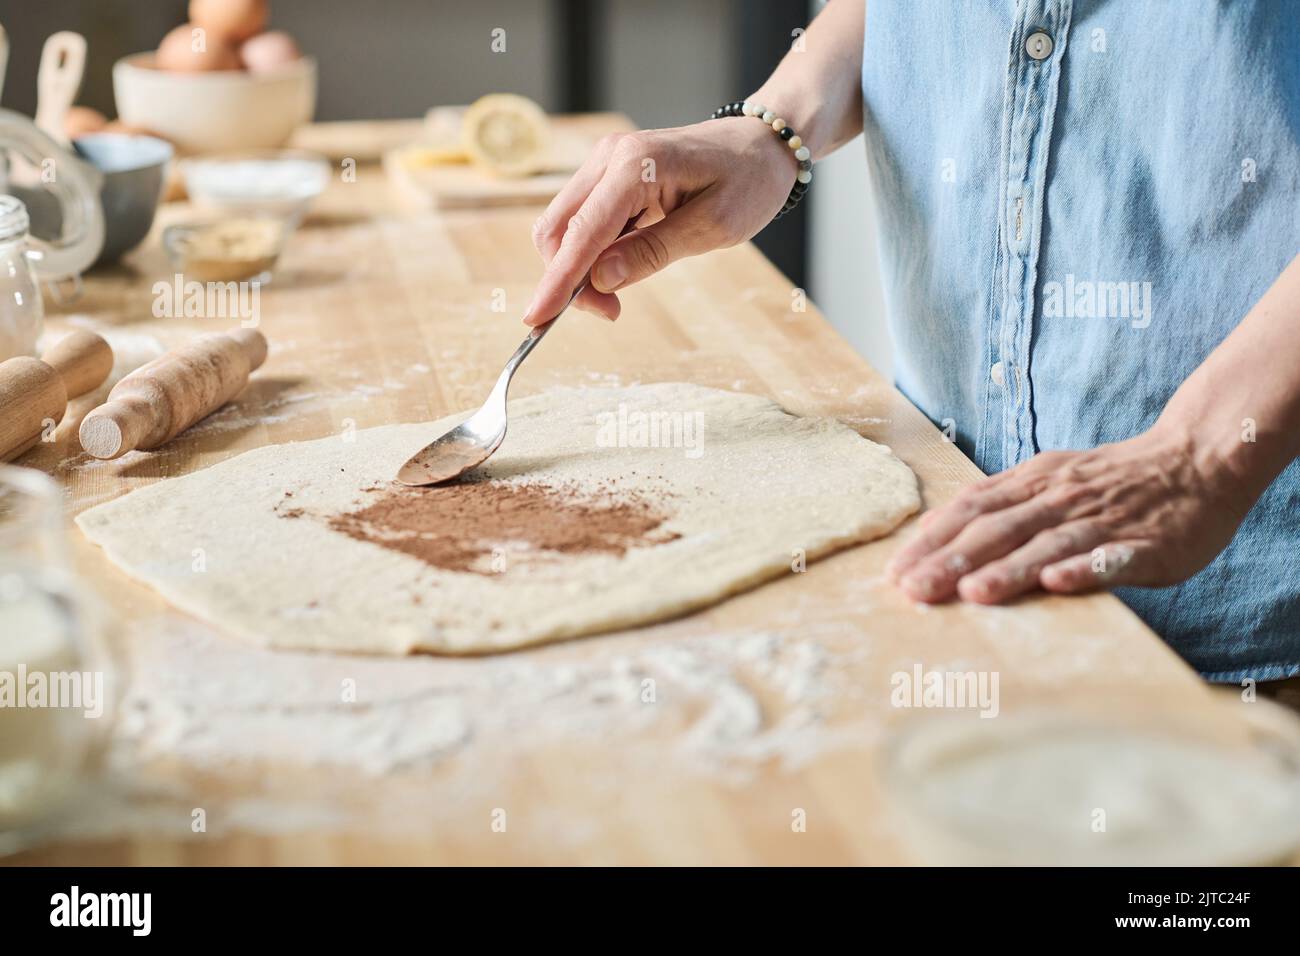 Close-up of housewife adding cinnamon with spoon to dough to bake buns in kitchen Stock Photo